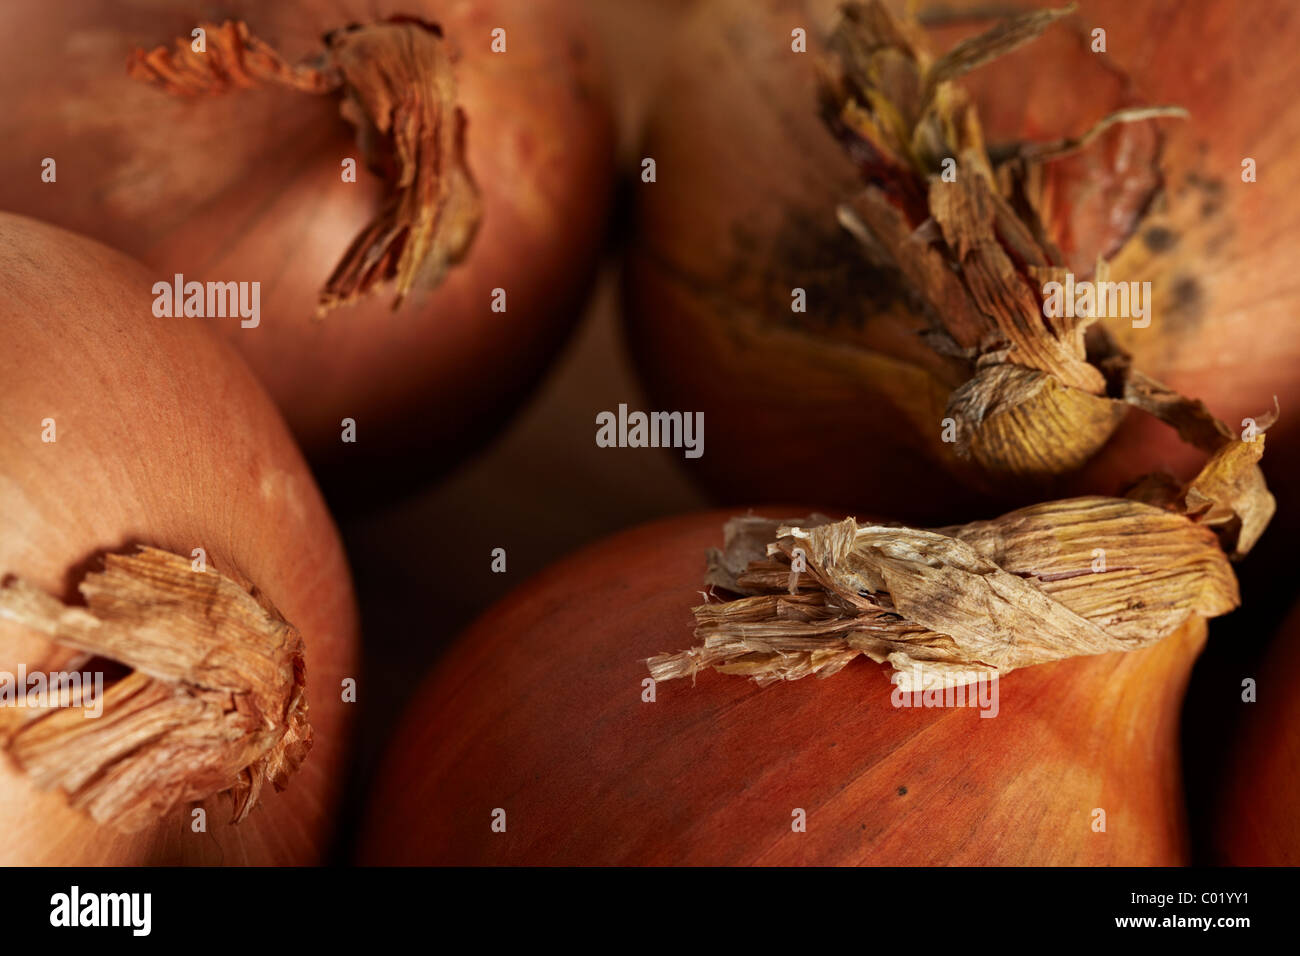 Onions on a chopping board in a kitchen. Stock Photo